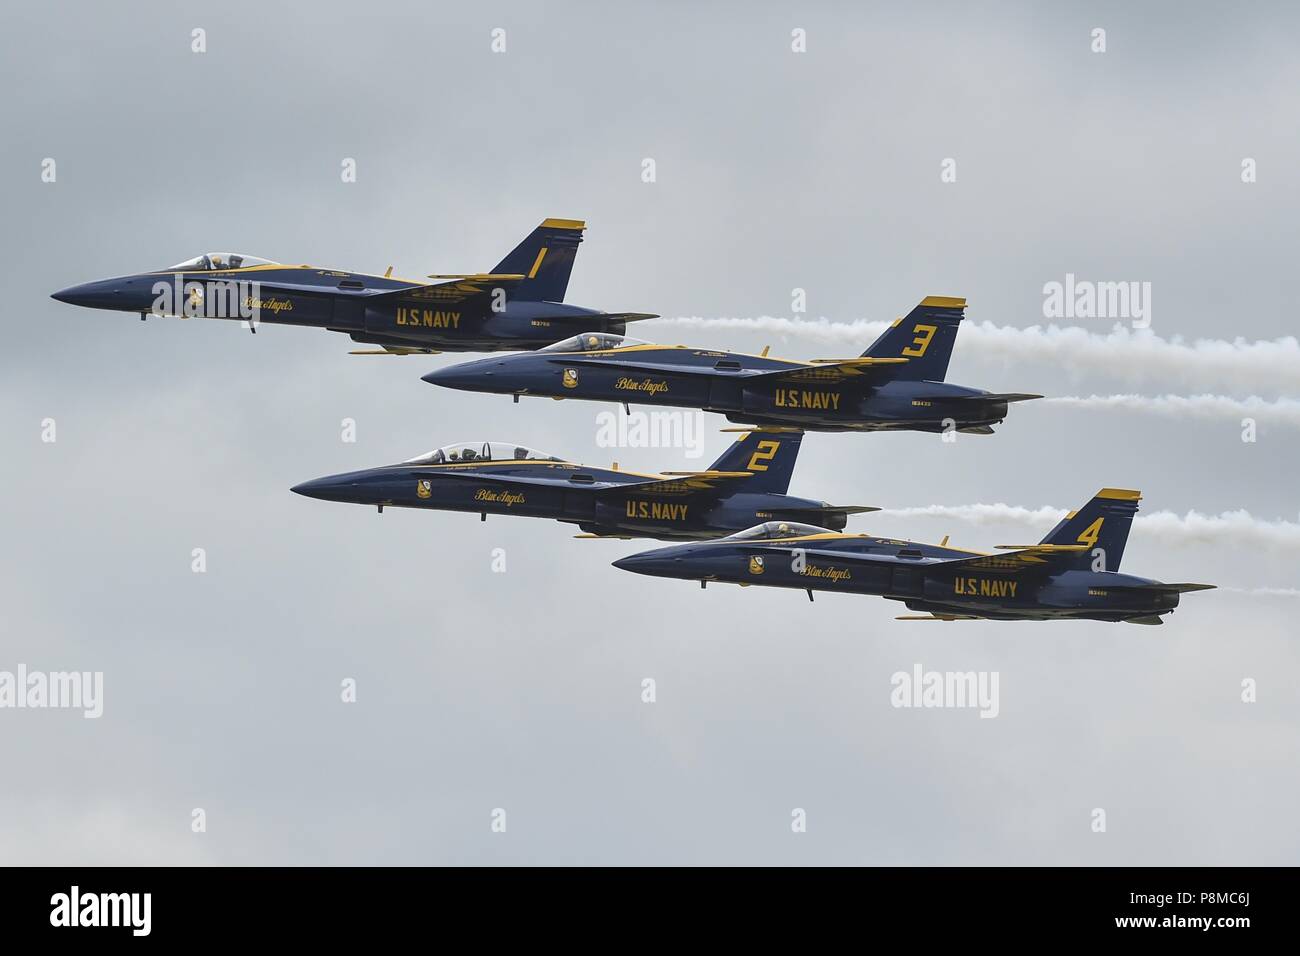 180623-N-UK306-1192 Dayton, Ohio (June 23, 2018) The U.S. Navy flight demonstration squadron, the Blue Angels, perform during the Vectren Dayton Air Show in Dayton, Ohio, June 24, 2018. The Blue Angels are scheduled to perform more than 60 demonstrations at more than 30 locations across the U.S. and Canada in 2018. (U.S. Navy photo by Mass Communication Specialist 2nd Class Timothy Schumaker/Released). () Stock Photo